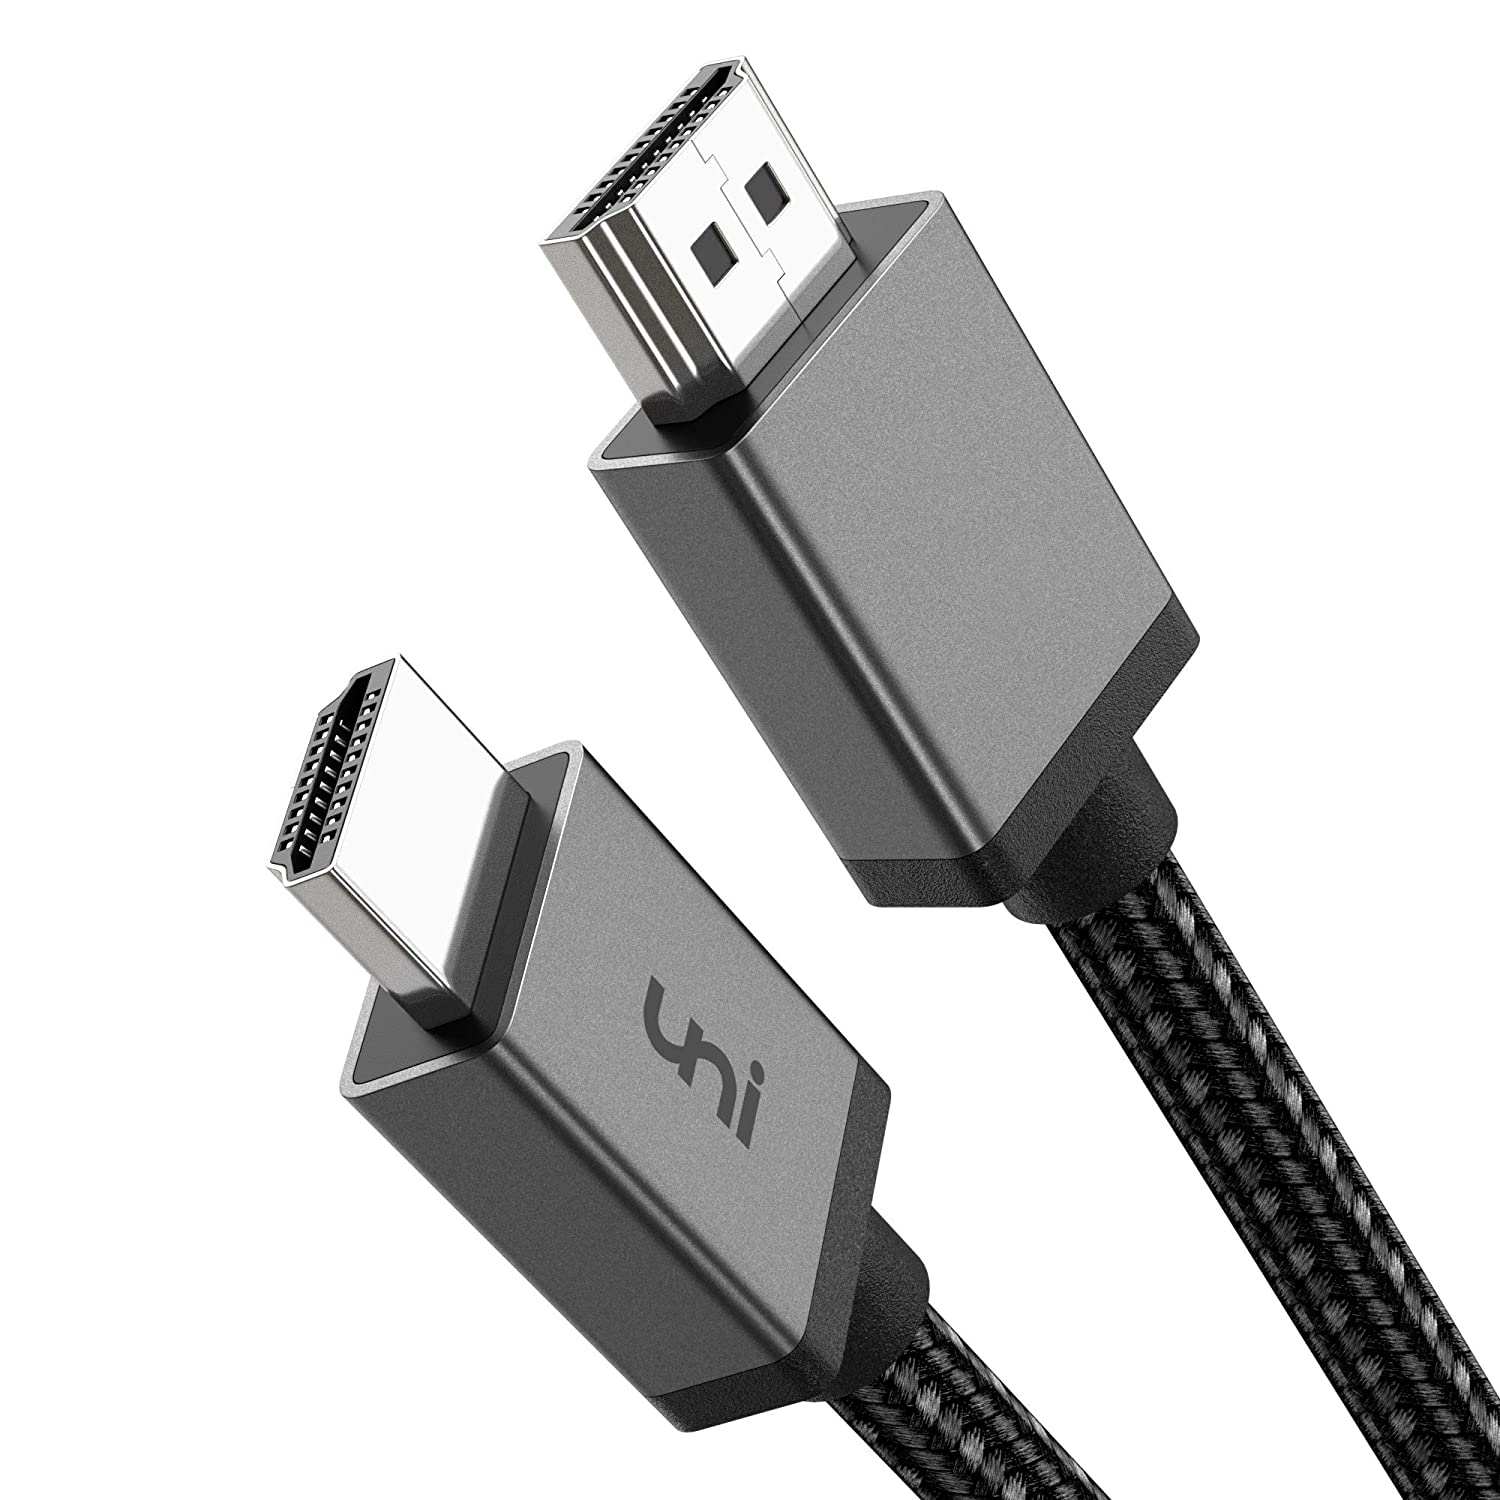 Cable HDMI 8K